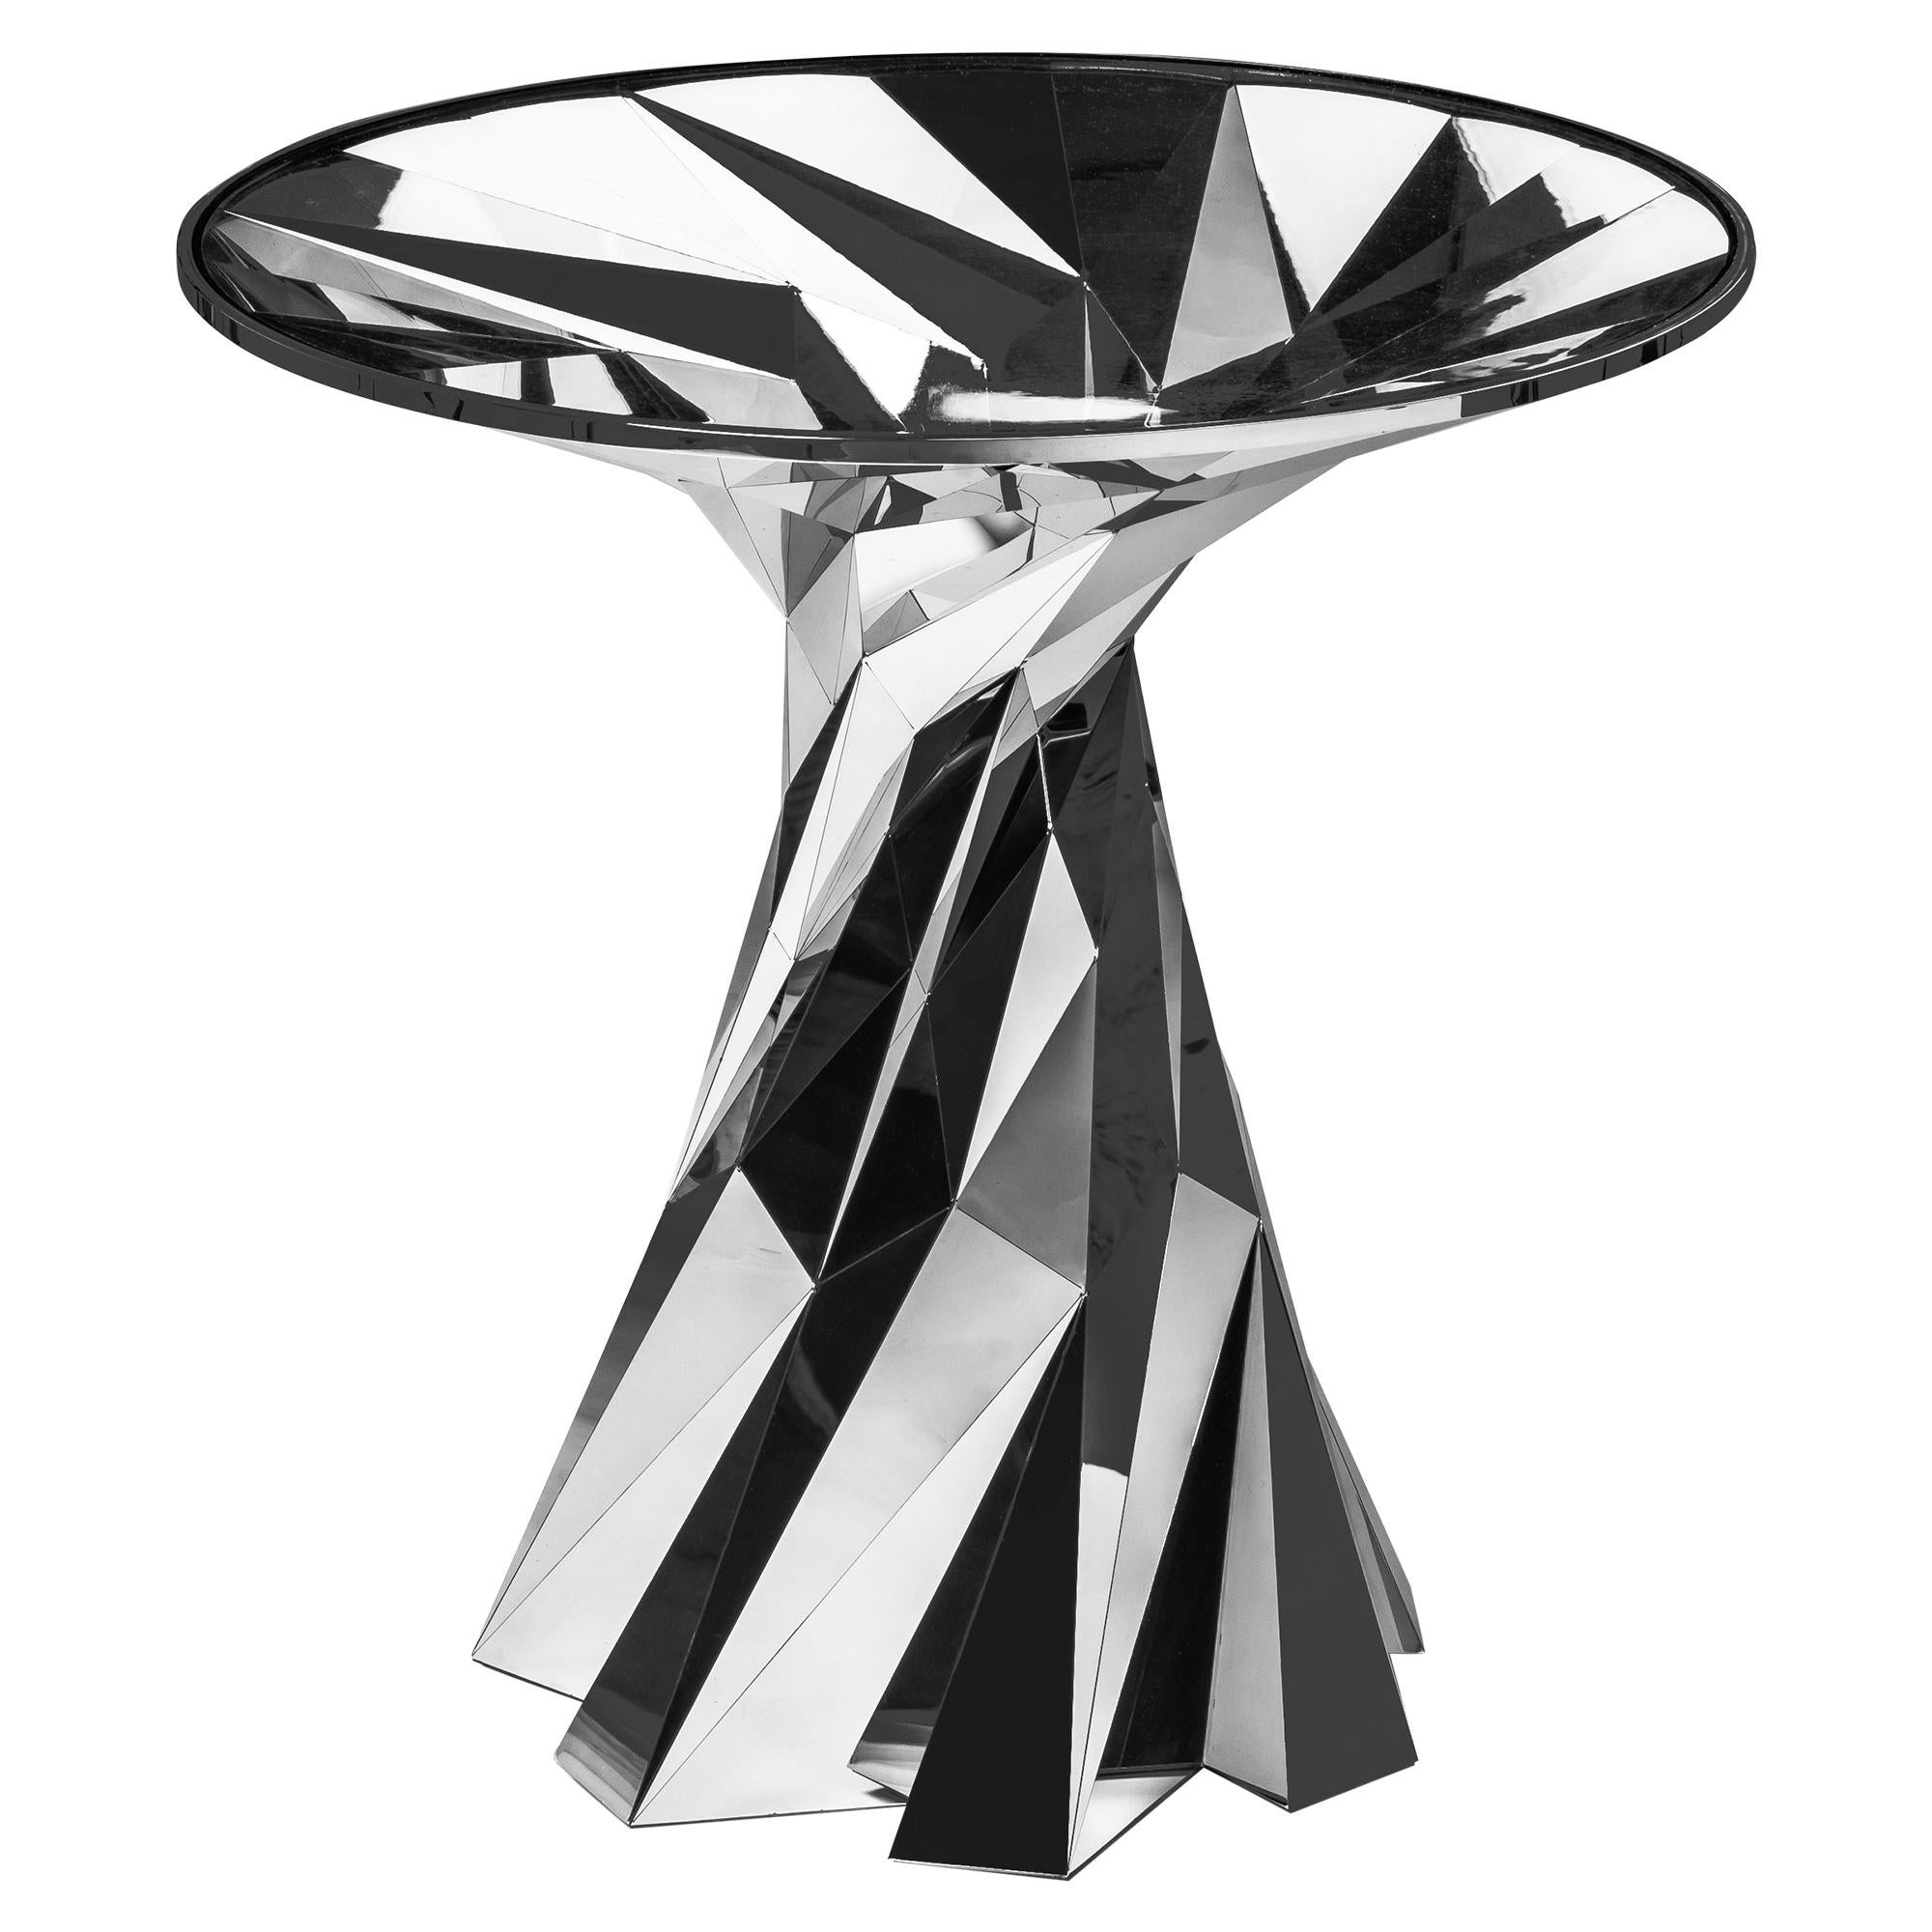 Object #MT-T5-S-S Mirror Polished Stainless Steel Side Table by Zhoujie Zhang